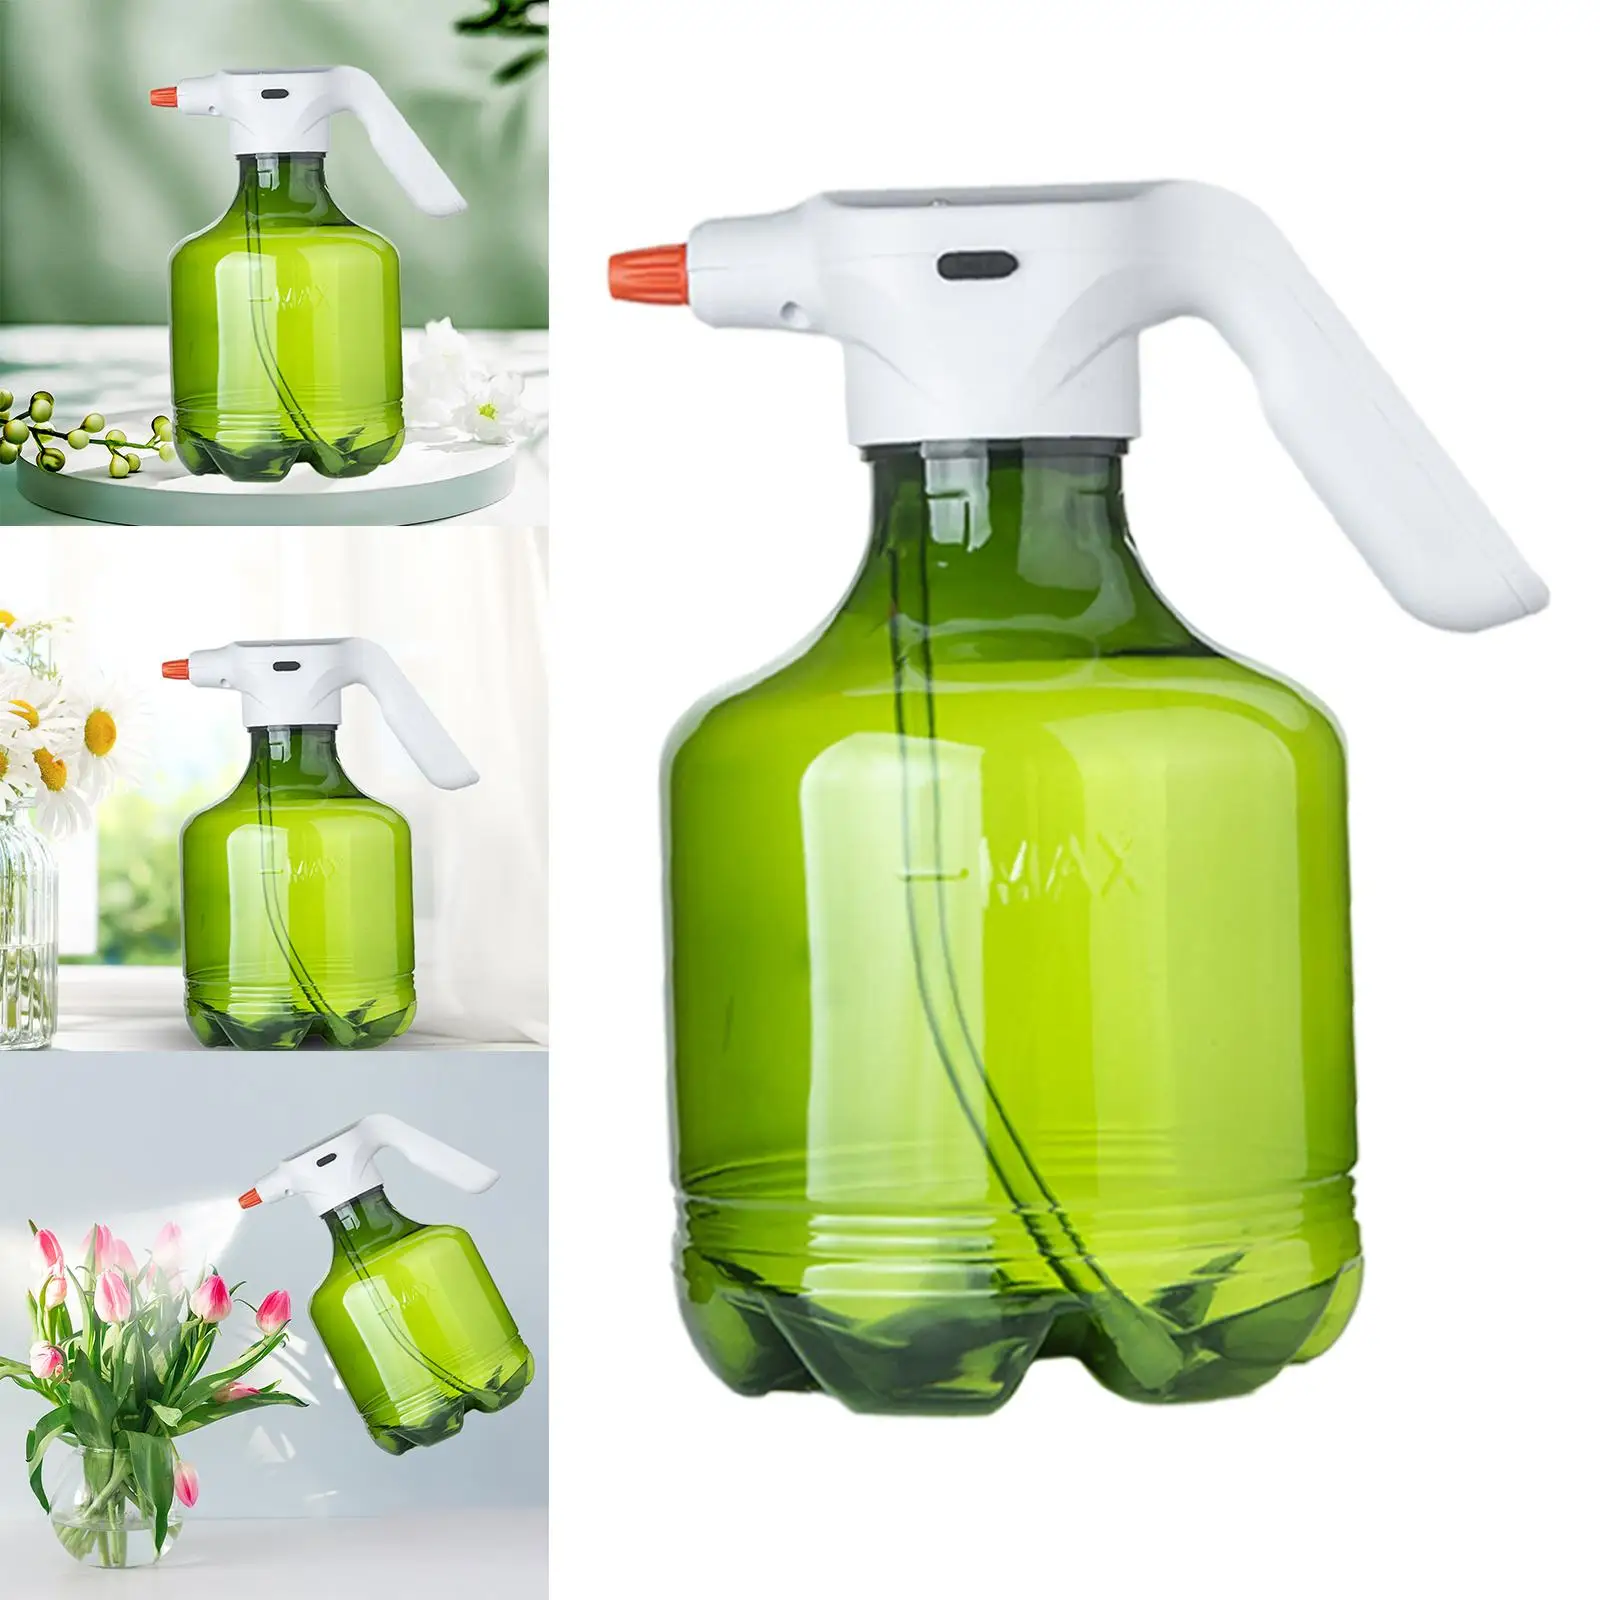 Handheld Electric Spray Bottle with Adjustable Spout 3L Electric Watering Can Indoor Outdoor Plants Cleaning Home Lawn Yard